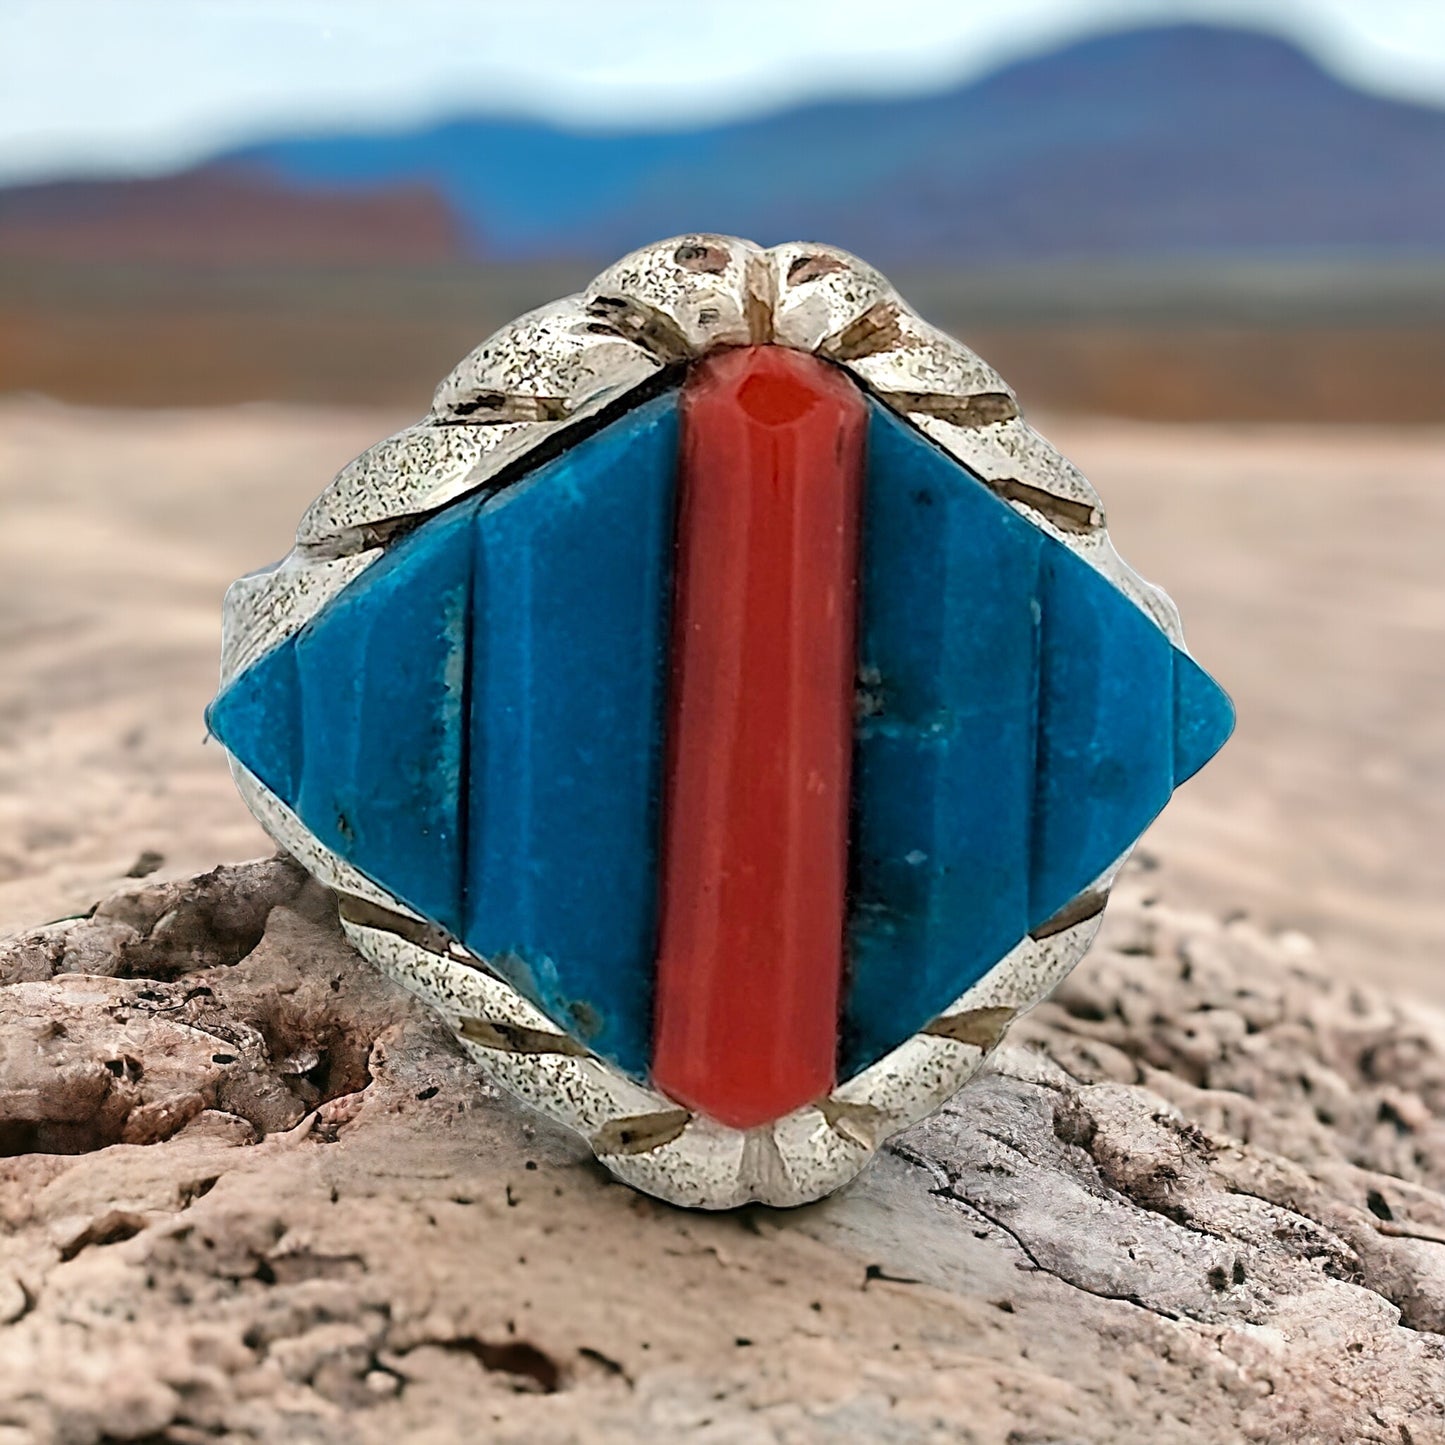 Tombstone's Treasure | Robert Drozd's Sterling Silver Ring with Kingman Turquoise & Coral - Size 8.5